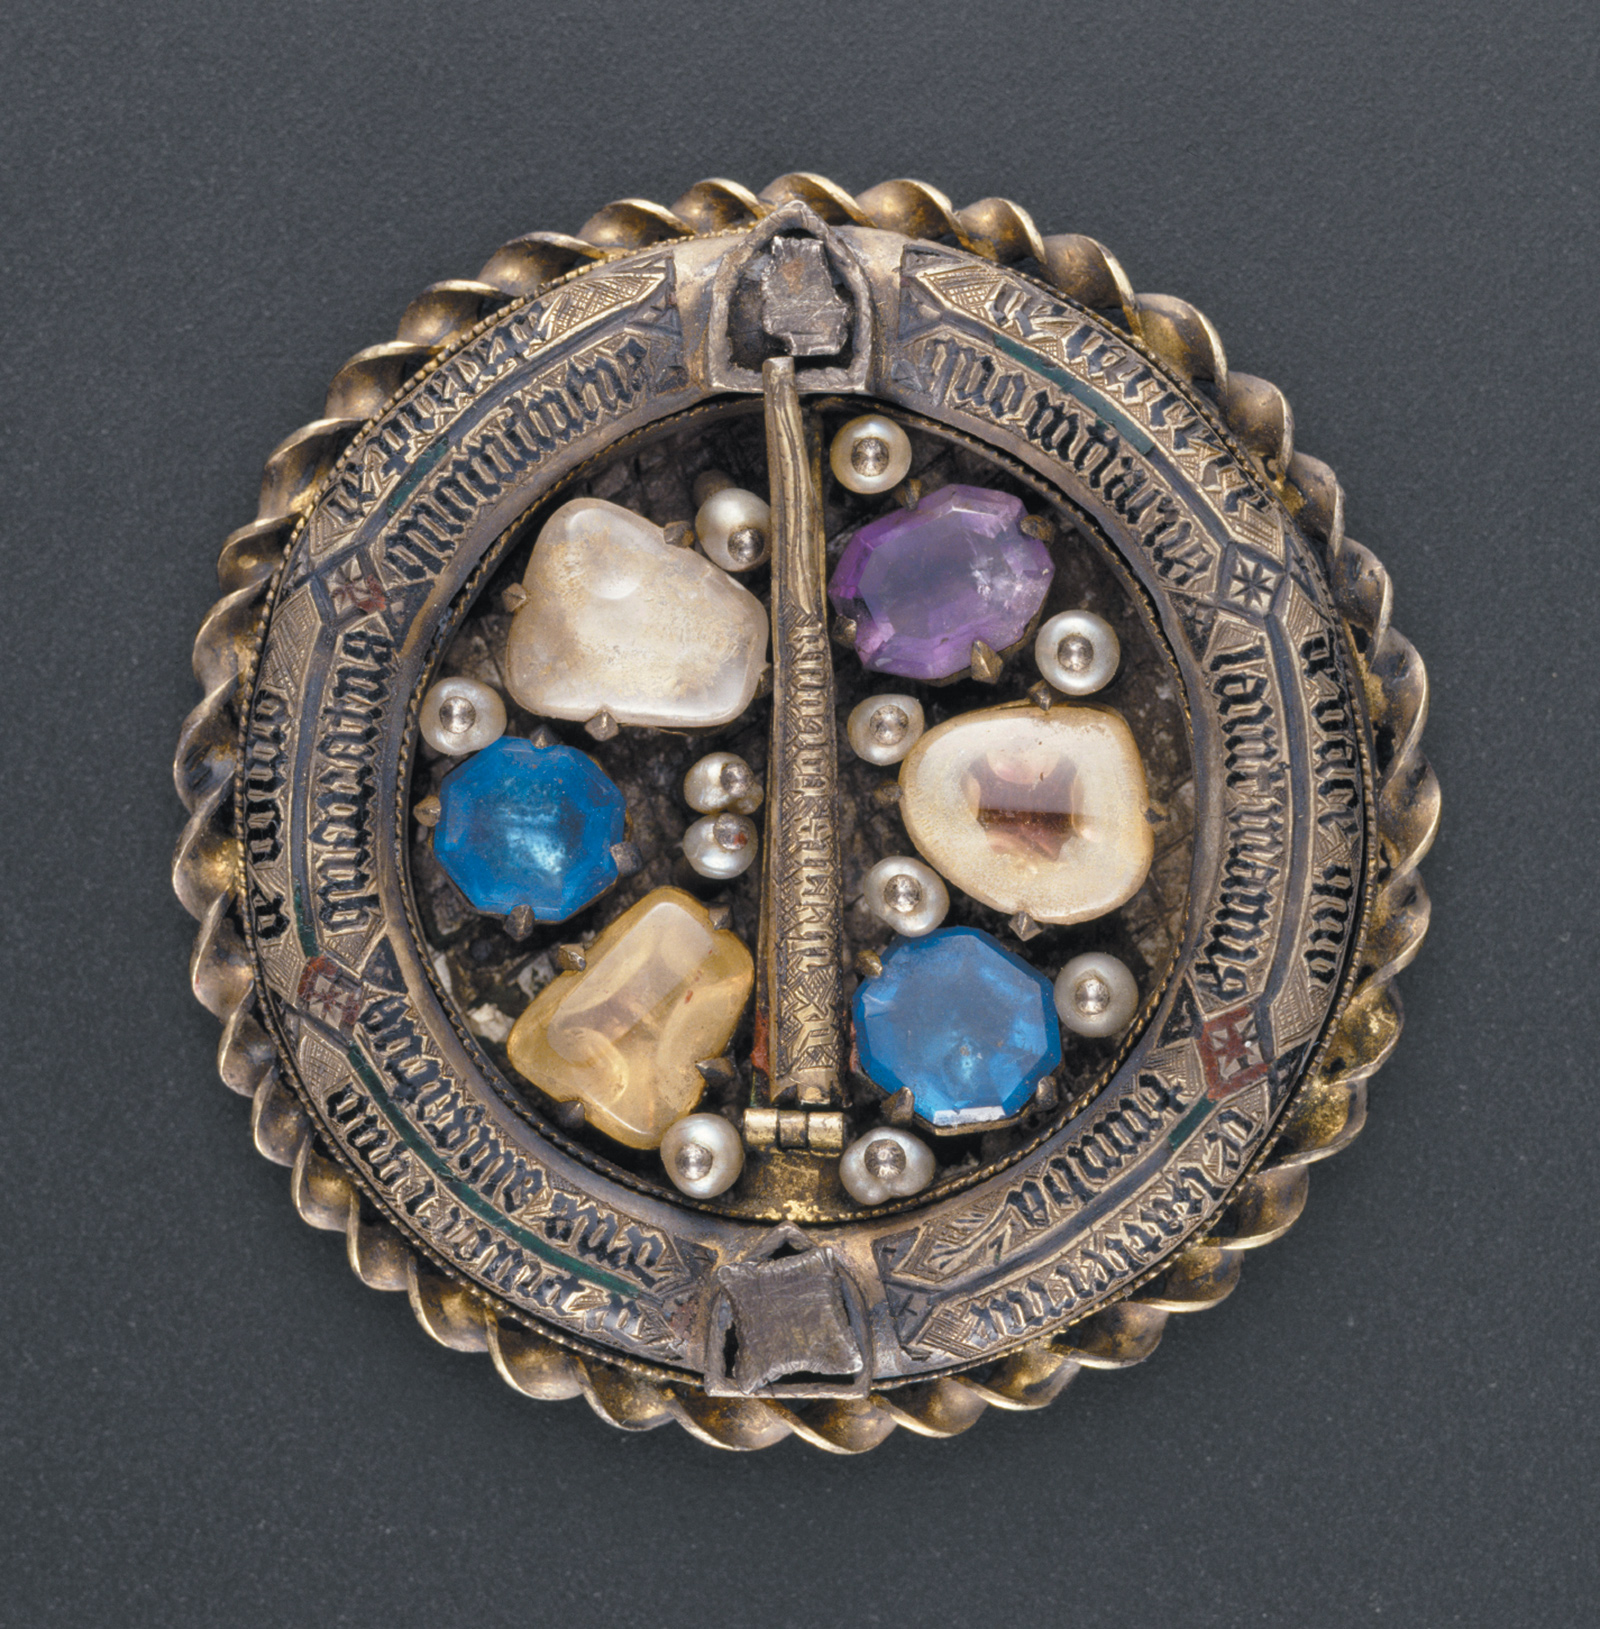 A reliquary medallion from the court of Charles V of France, who reigned from 1364 to 1380. According to Cynthia Hahn in Saints and Sacred Matter, ‘on the front of the object we see what looks like the back of a ring brooch. The thorn [from Christ’s crown of thorns], identified in inscriptions as enclosed in the brooch’s “pin,” is encircled by a tubular ring that also holds Passion relics and reinforces the idea of the Crown.’